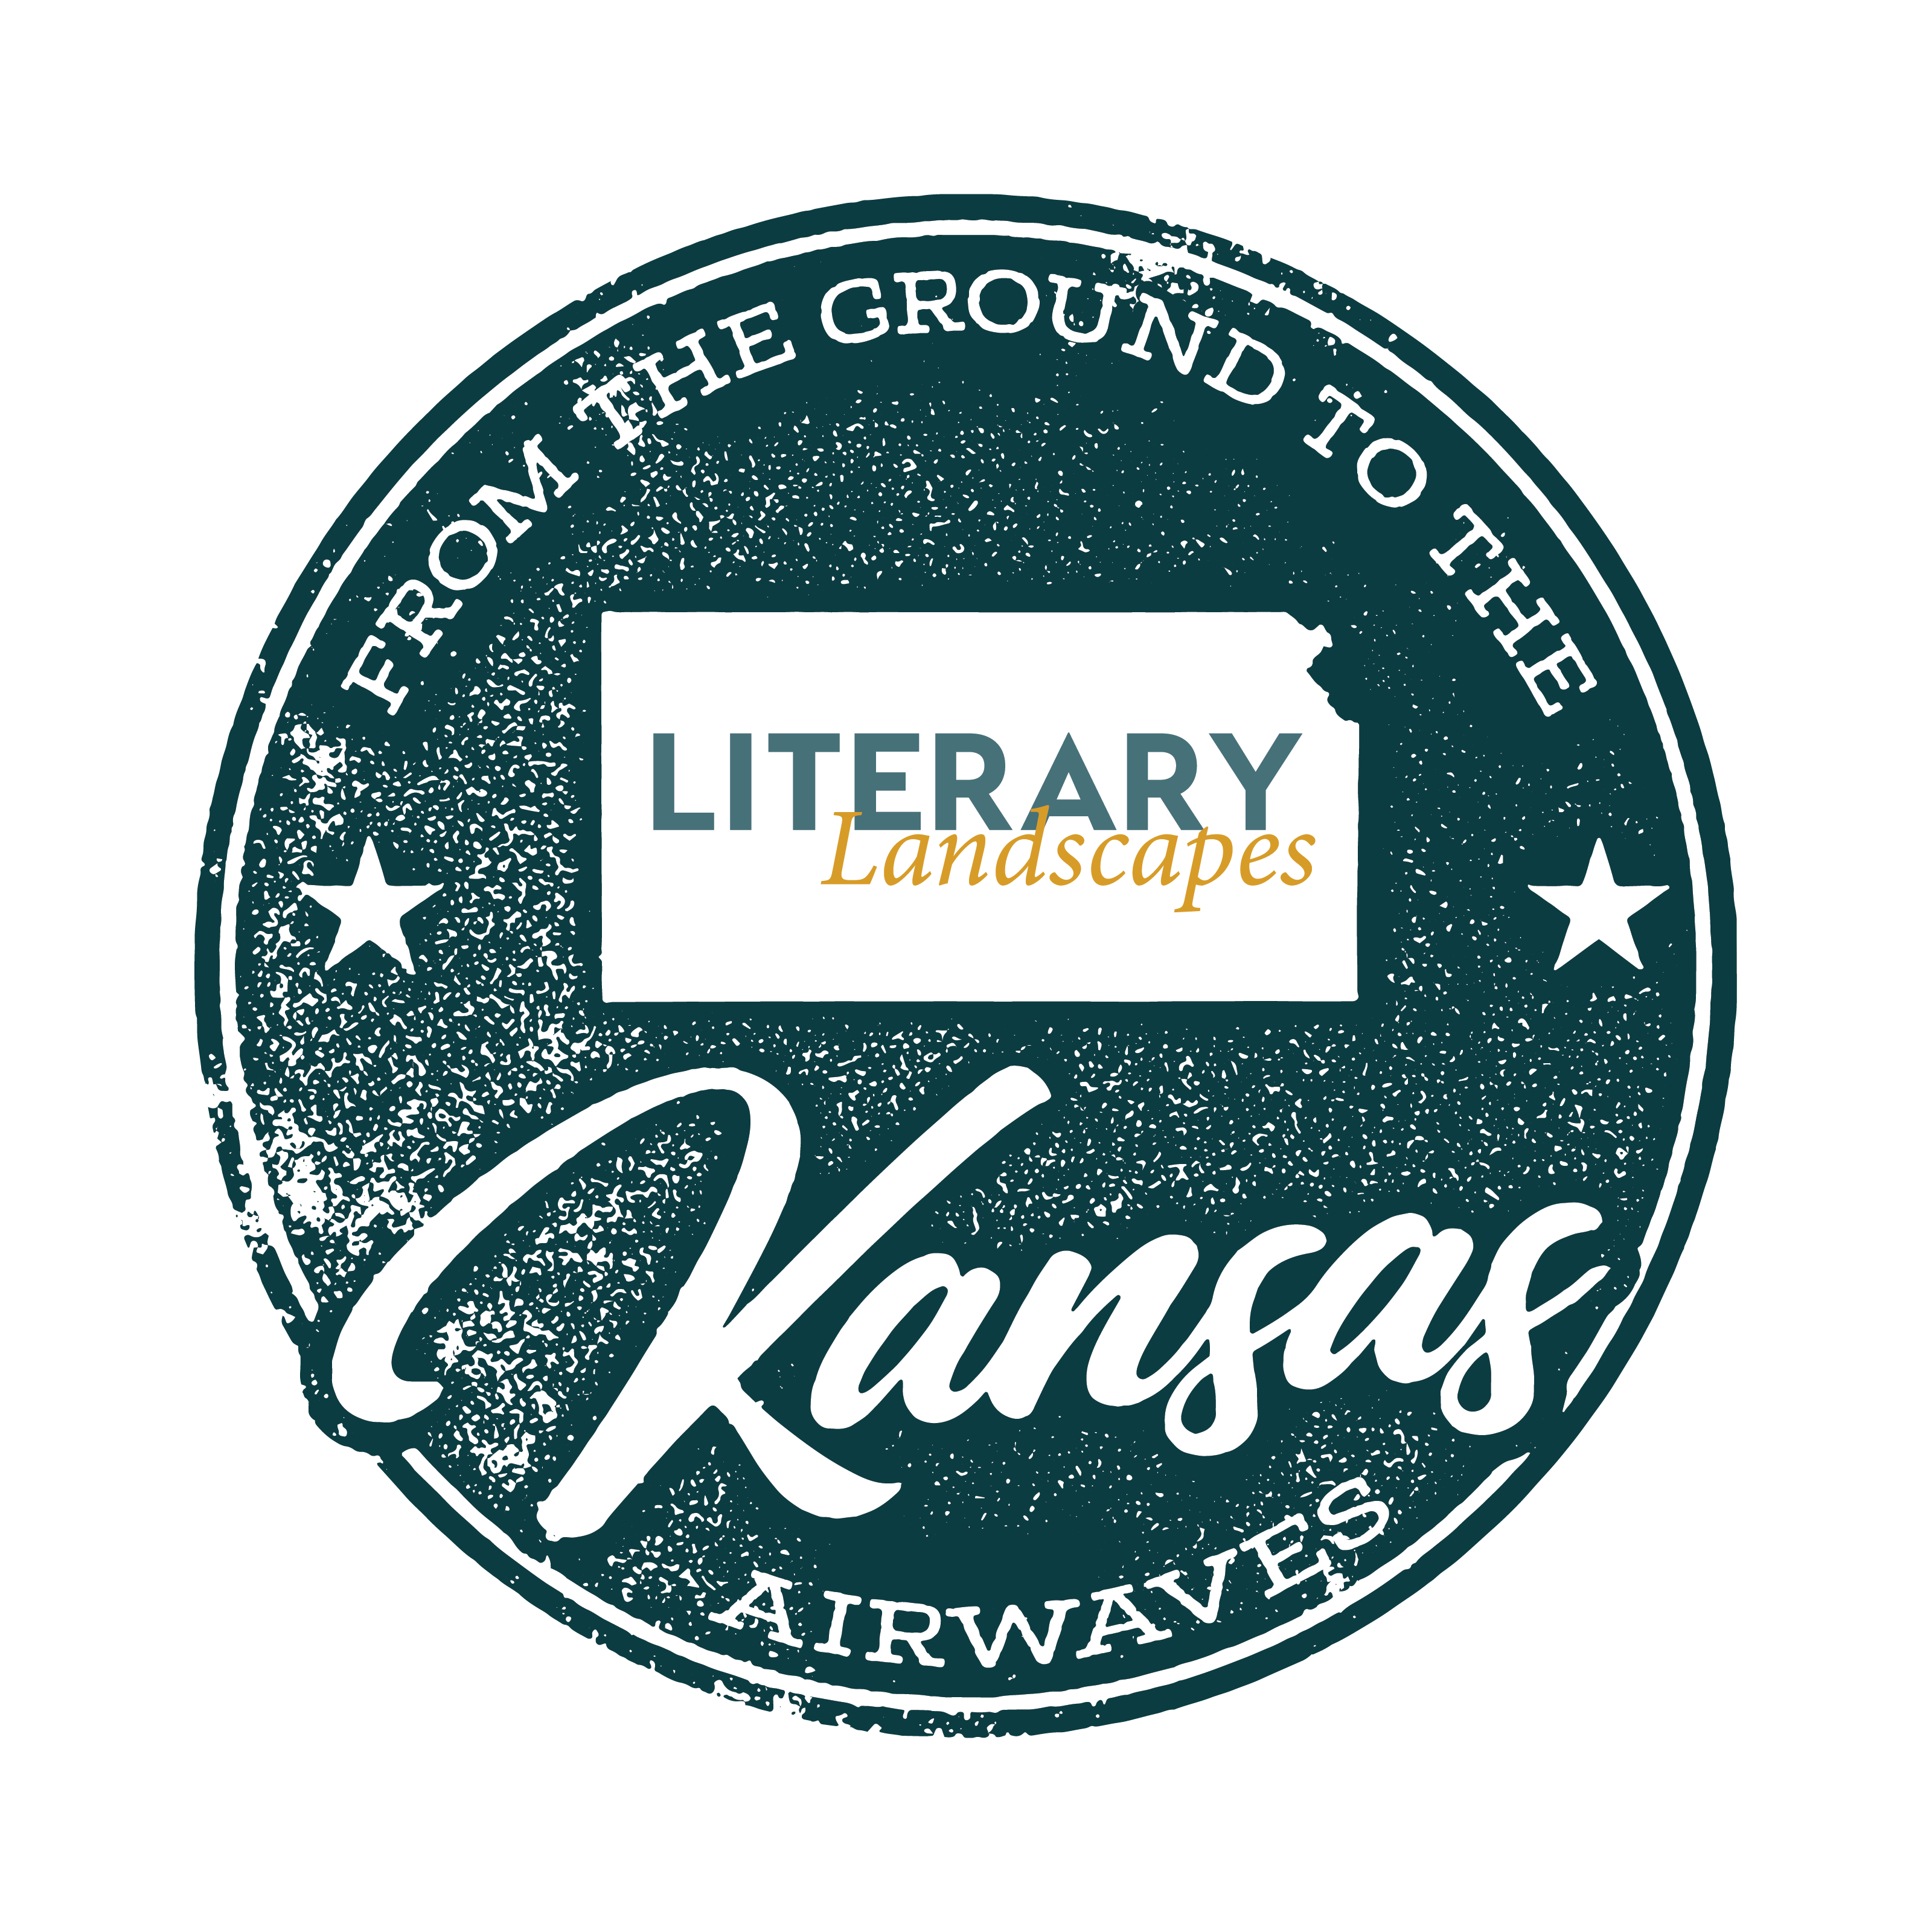 circle stamp shows shape of Kansas with "Literary Landscapes" in the state and "from the ground to the airwaves" inside the edge